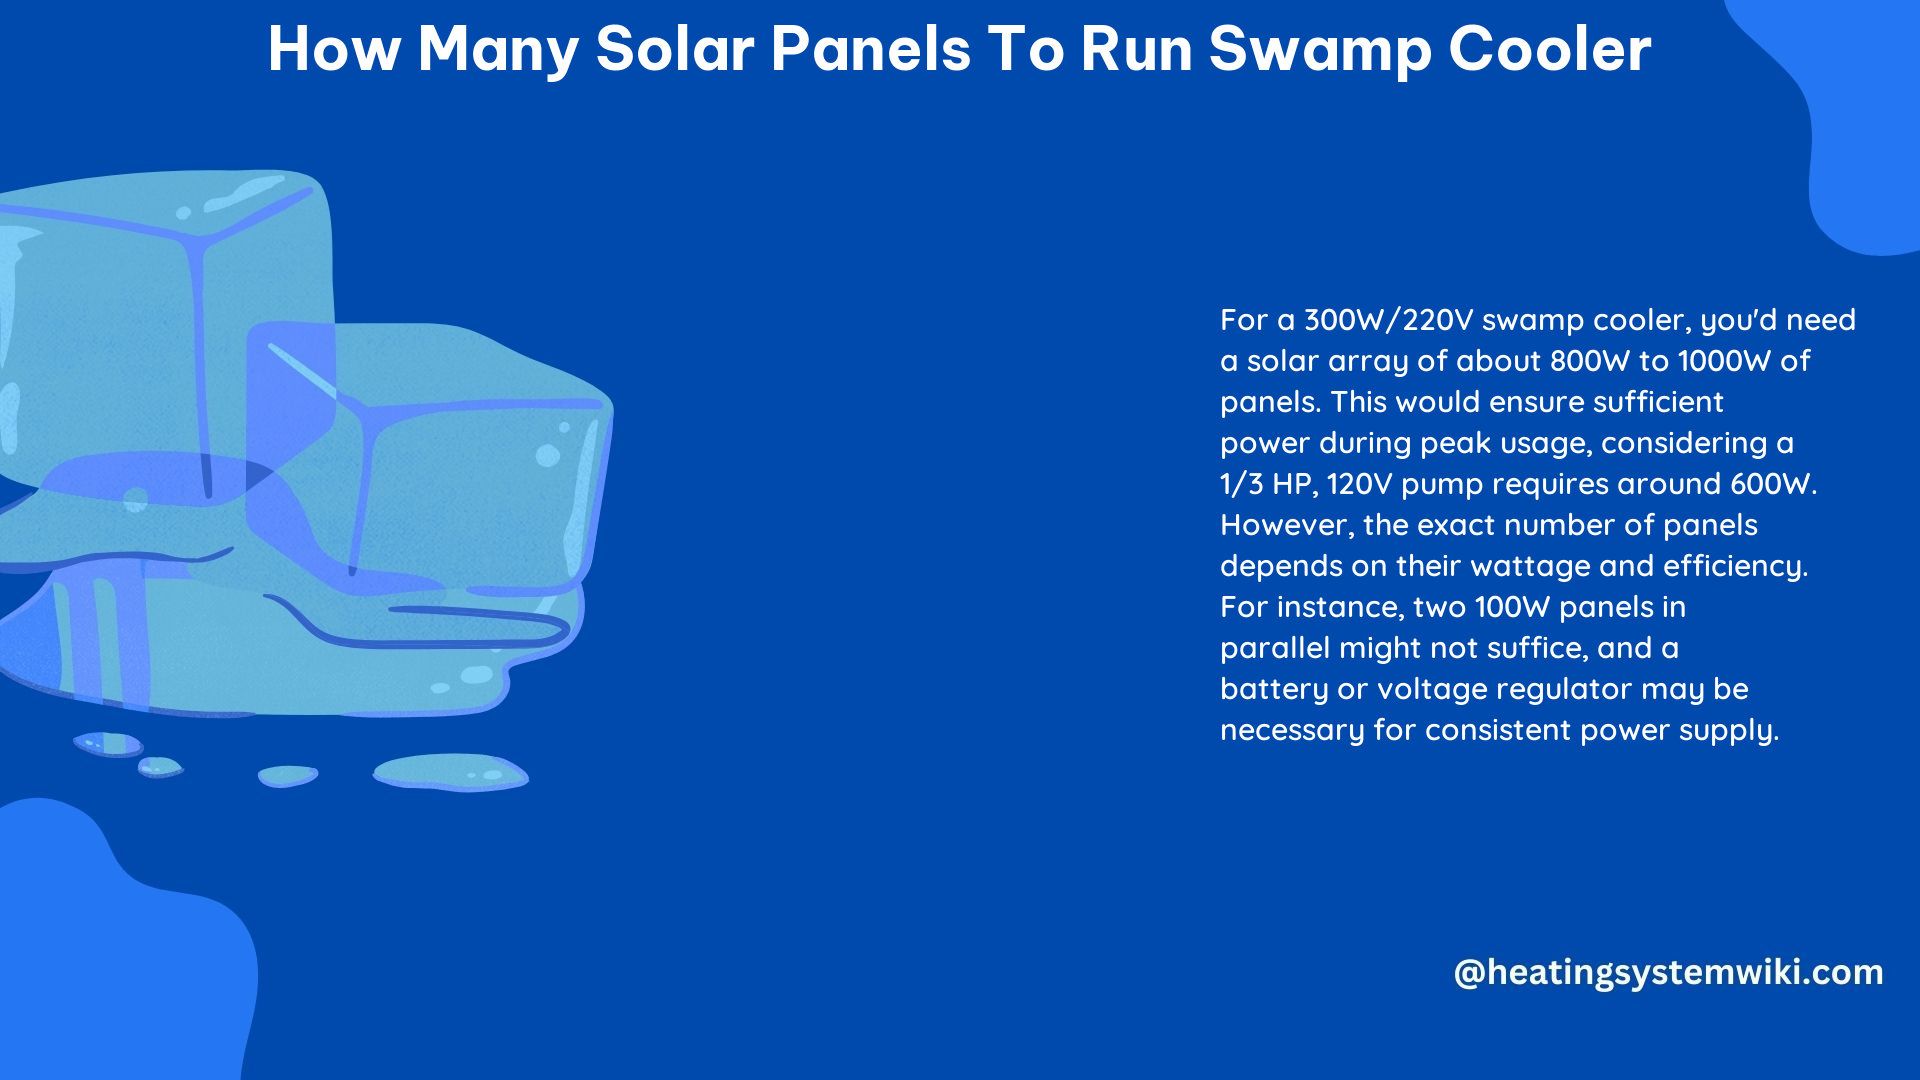 How Many Solar Panels to Run Swamp Cooler